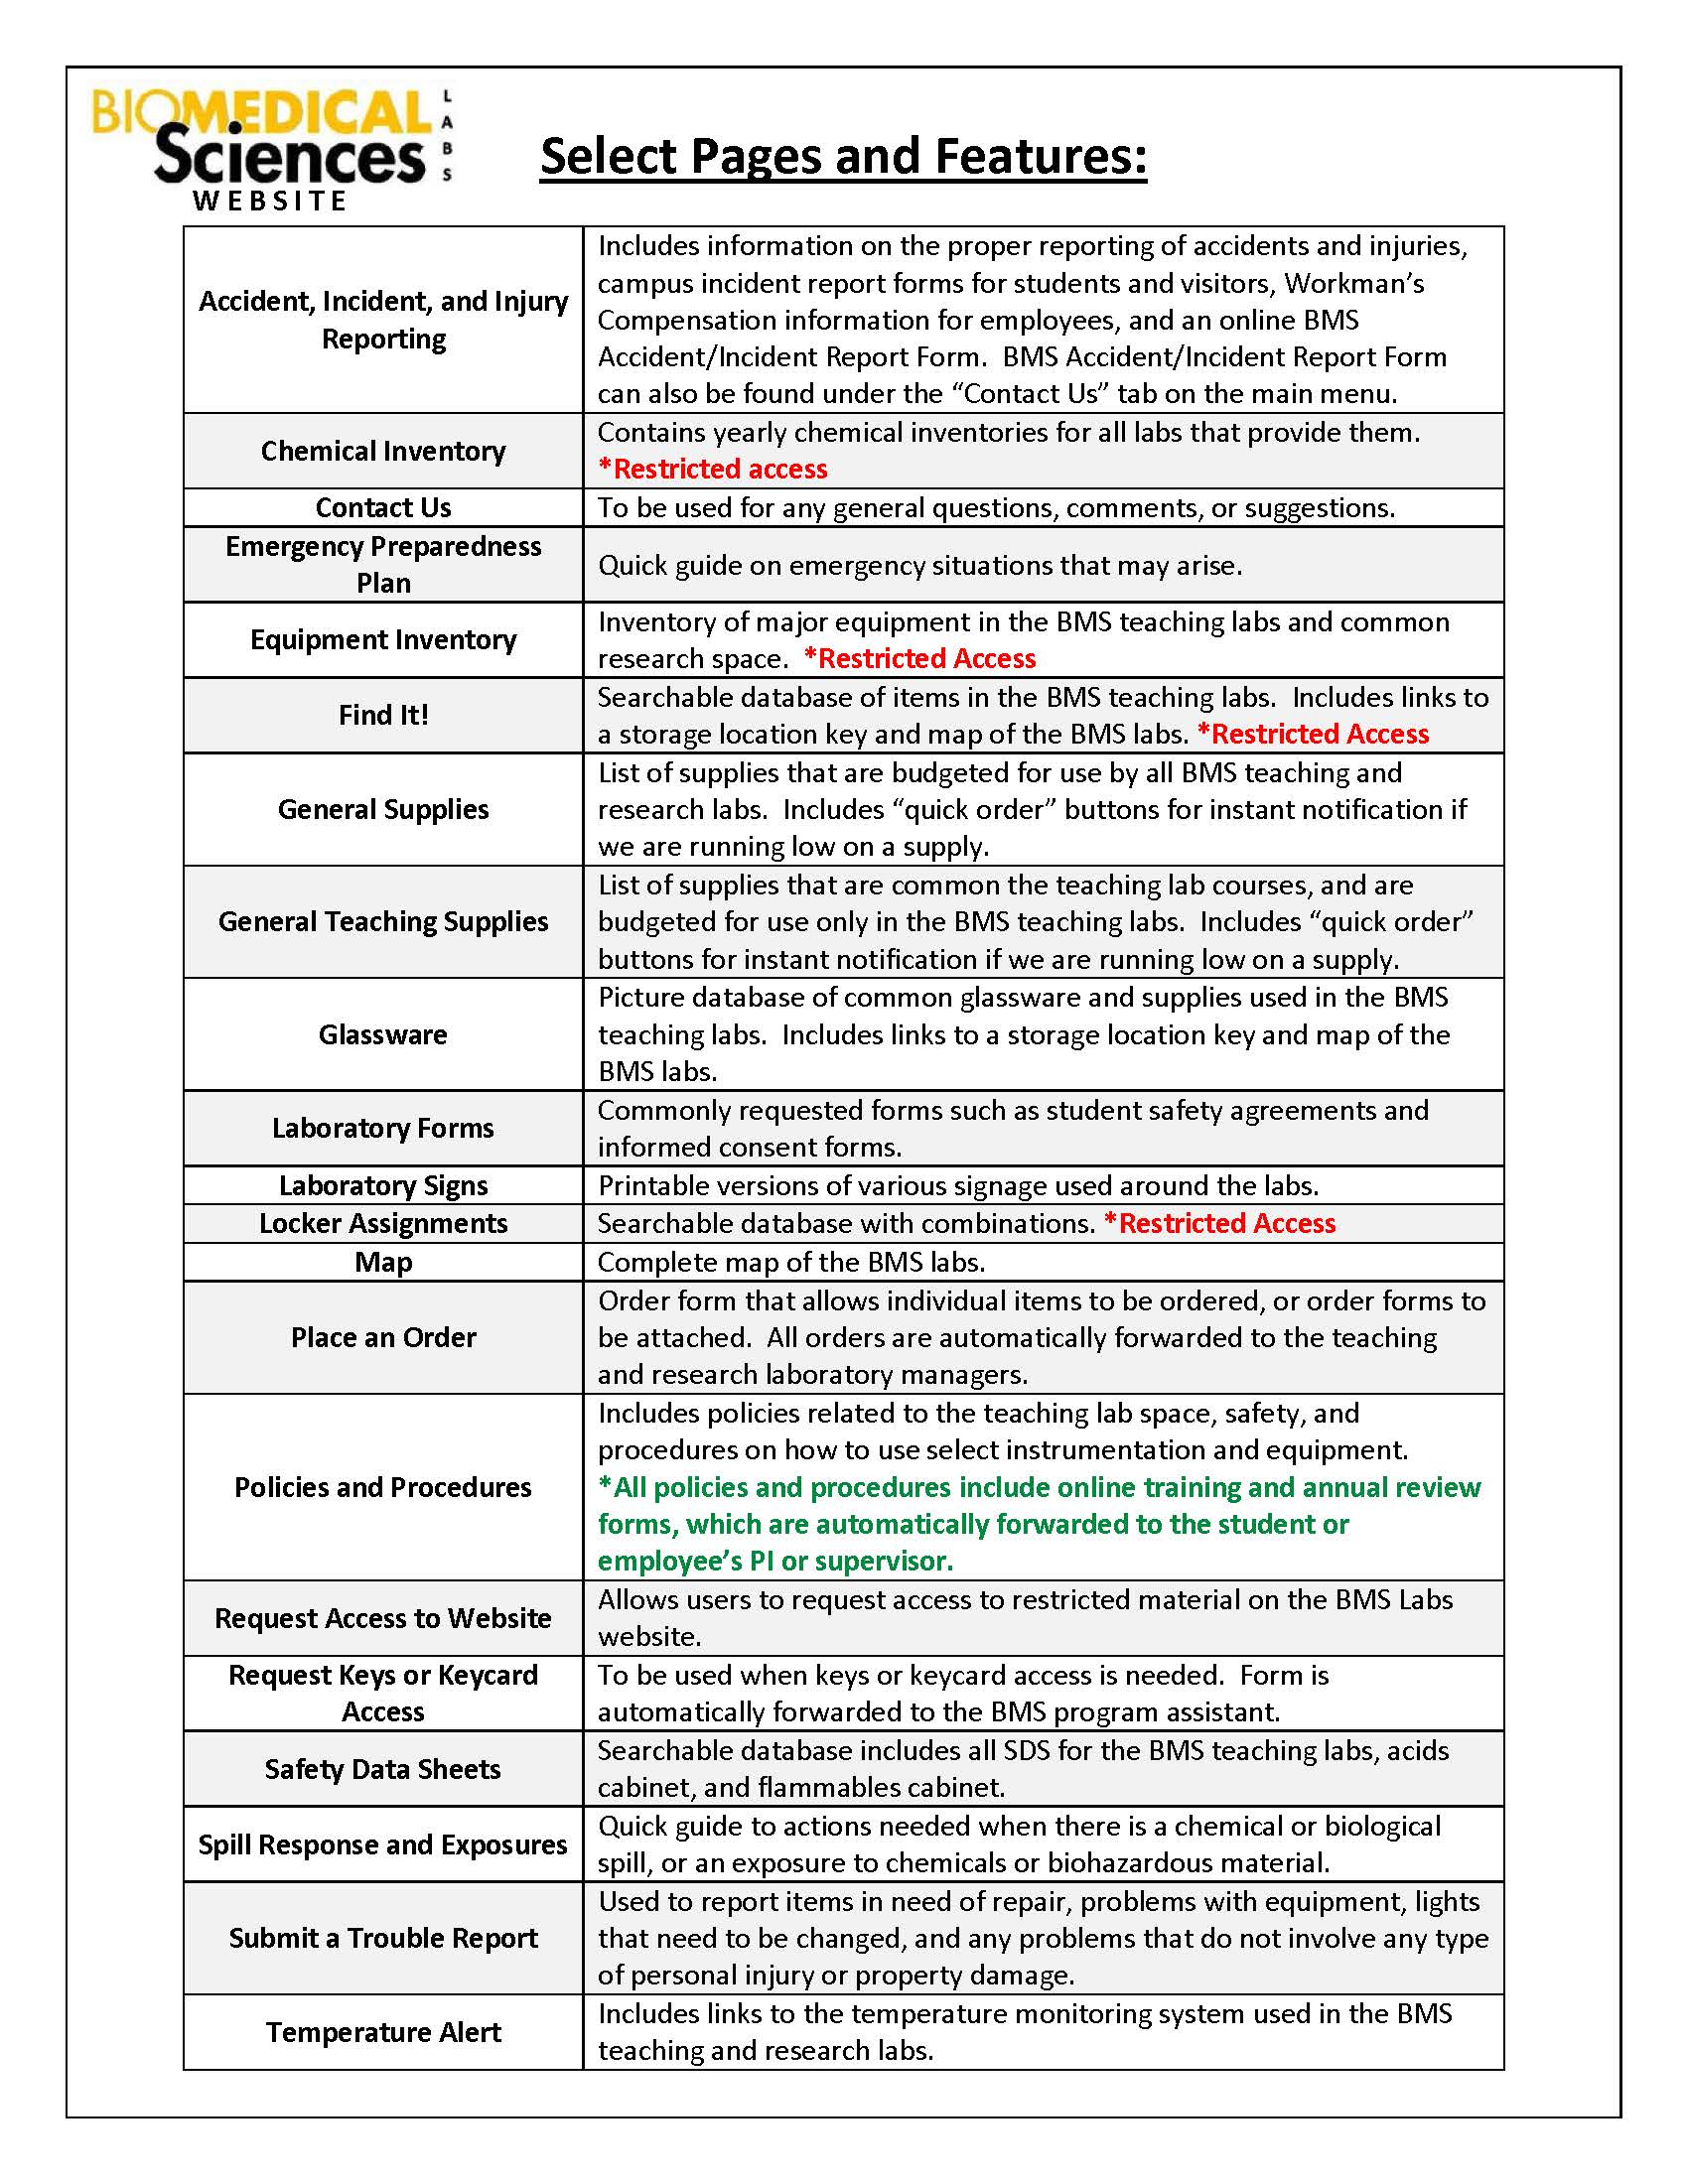 BMS Labs Website Information Sheet_Page_2